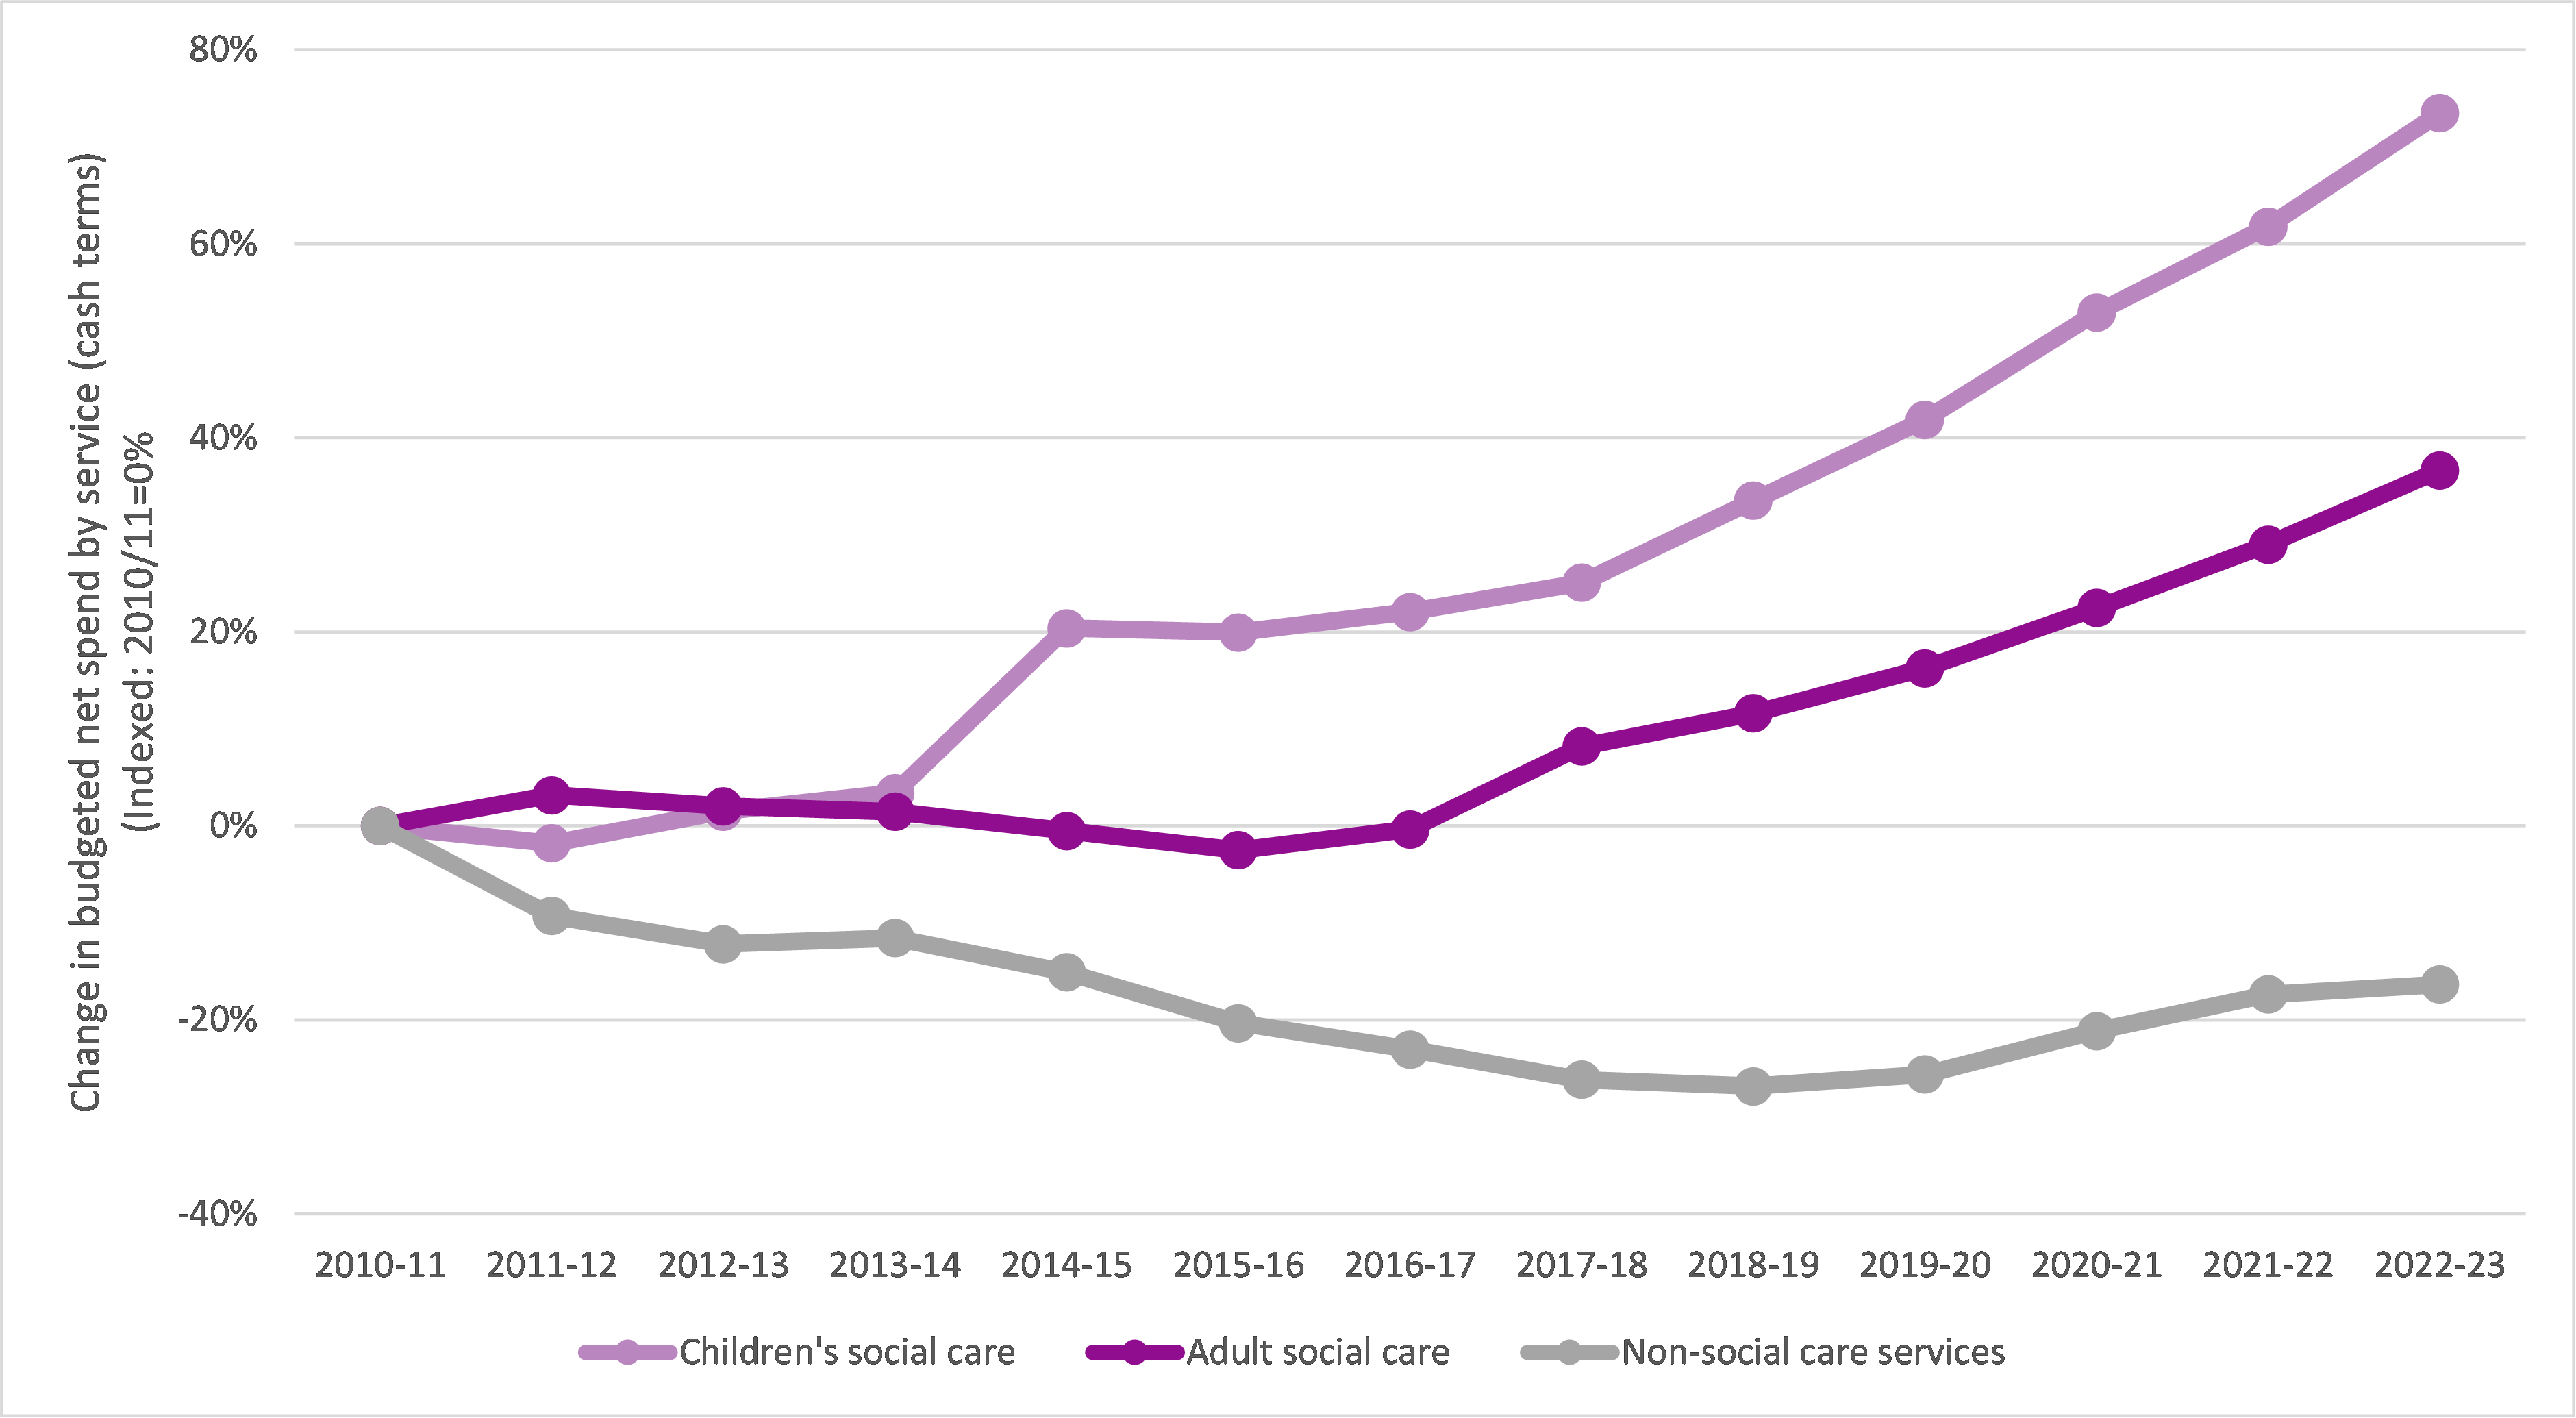 Source: LGA analysis of revenue account budget data published by the Department for Levelling Up, Housing and Communities.  ·	In 2014/15 there was a definitional change in the data for children's social care (which increased spend by c£1bn). The data is comparable from 2014/15 to 2022/23. ·	Non-social care services include planning and development, central services, environmental services, housing services (non-HRA), culture and leisure, and transport and highways ·	We exclude local authority spending on ed